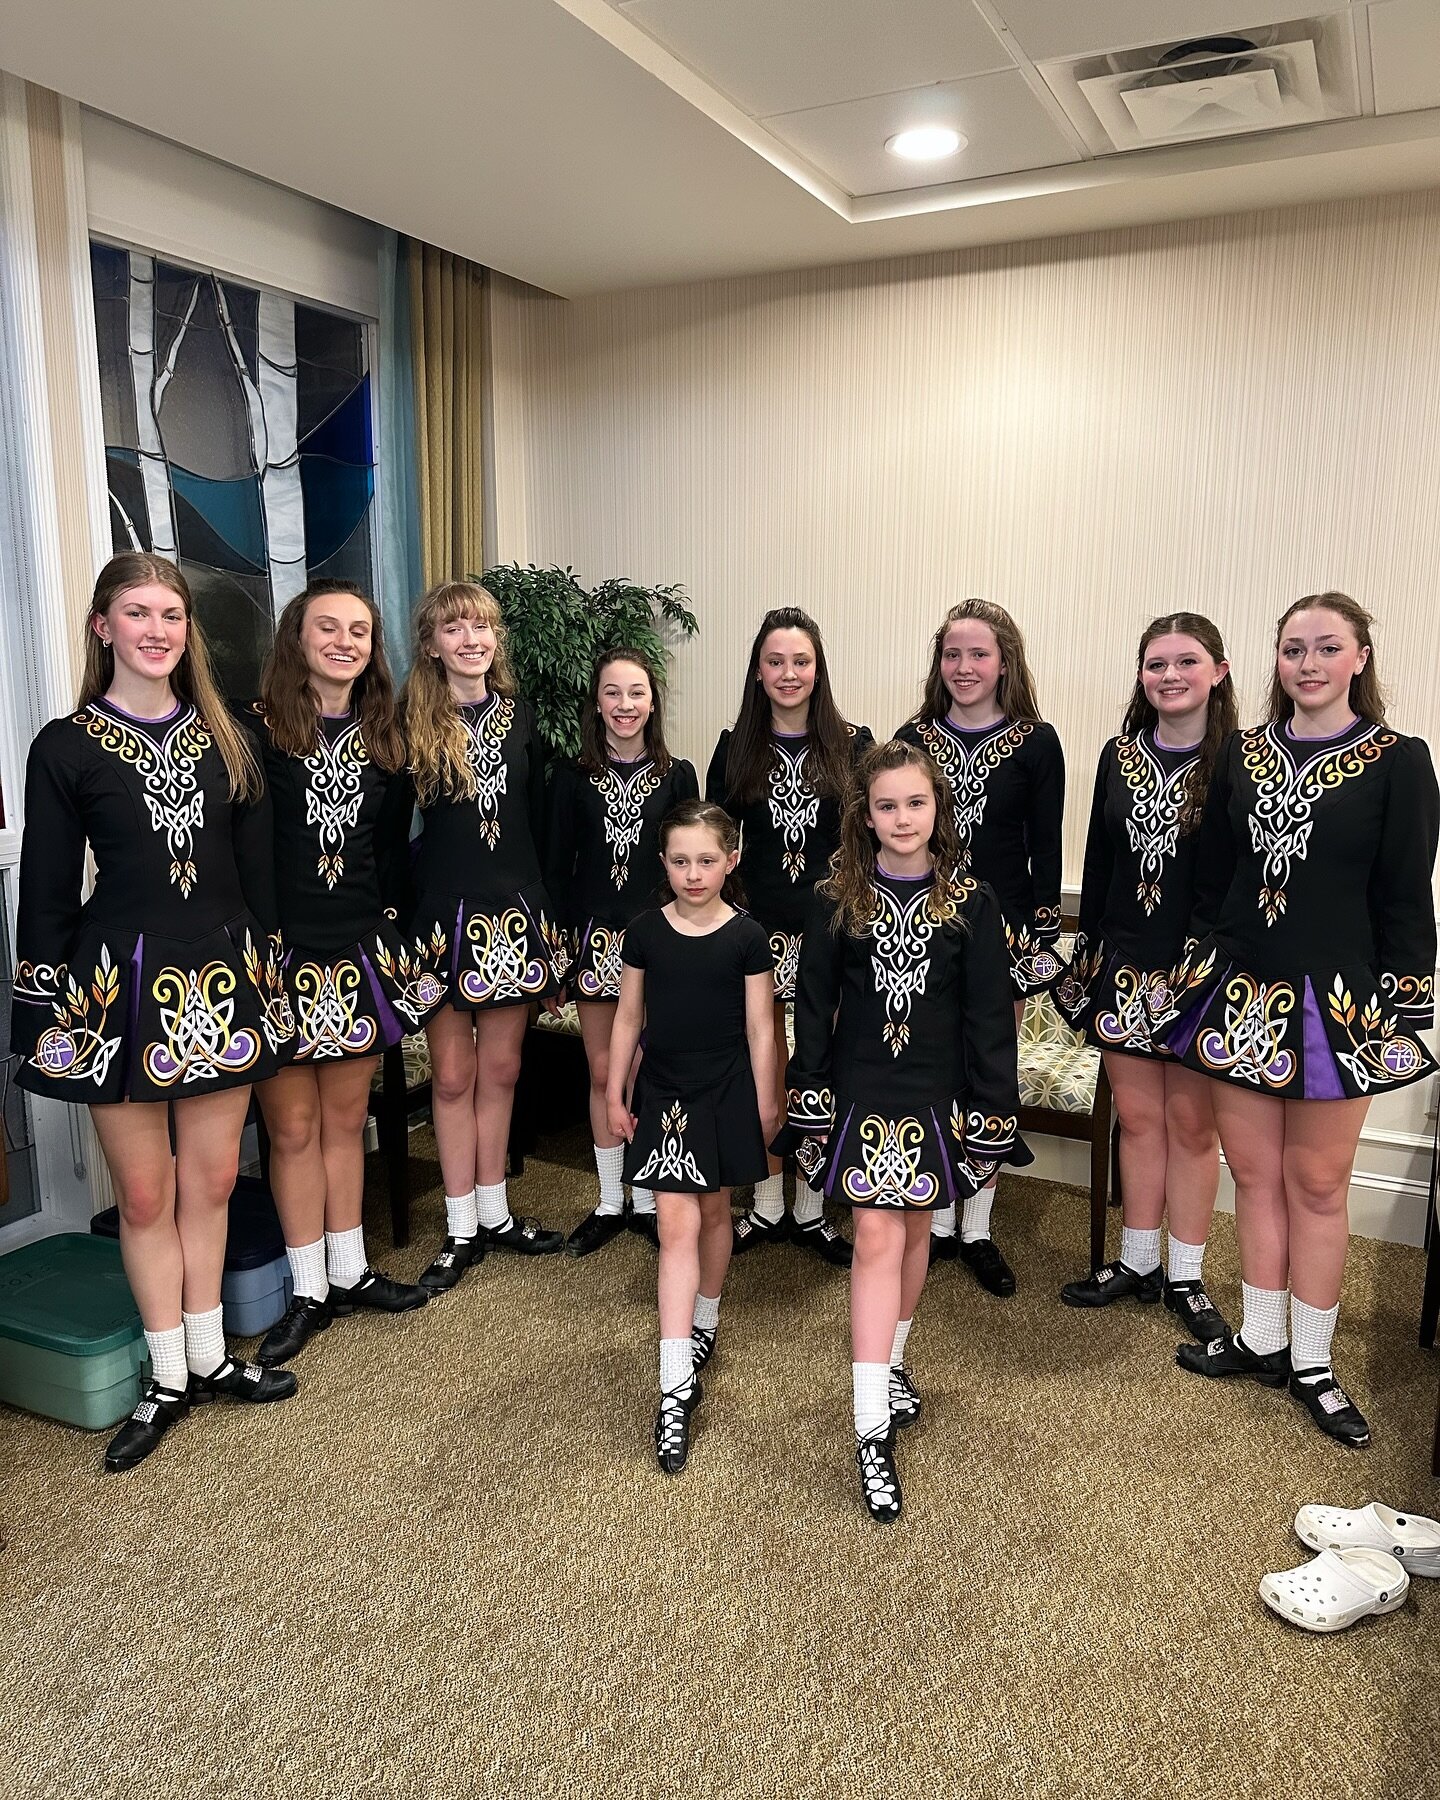 And that&rsquo;s a wrap on day one of our St. Paddy&rsquo;s Day weekend! We capped our (very long) day off with a performance for the wonderful residents of College Park II! Well done to our dancers! 🍀🍀

#happystpatricksday #irishdanceregina #irish